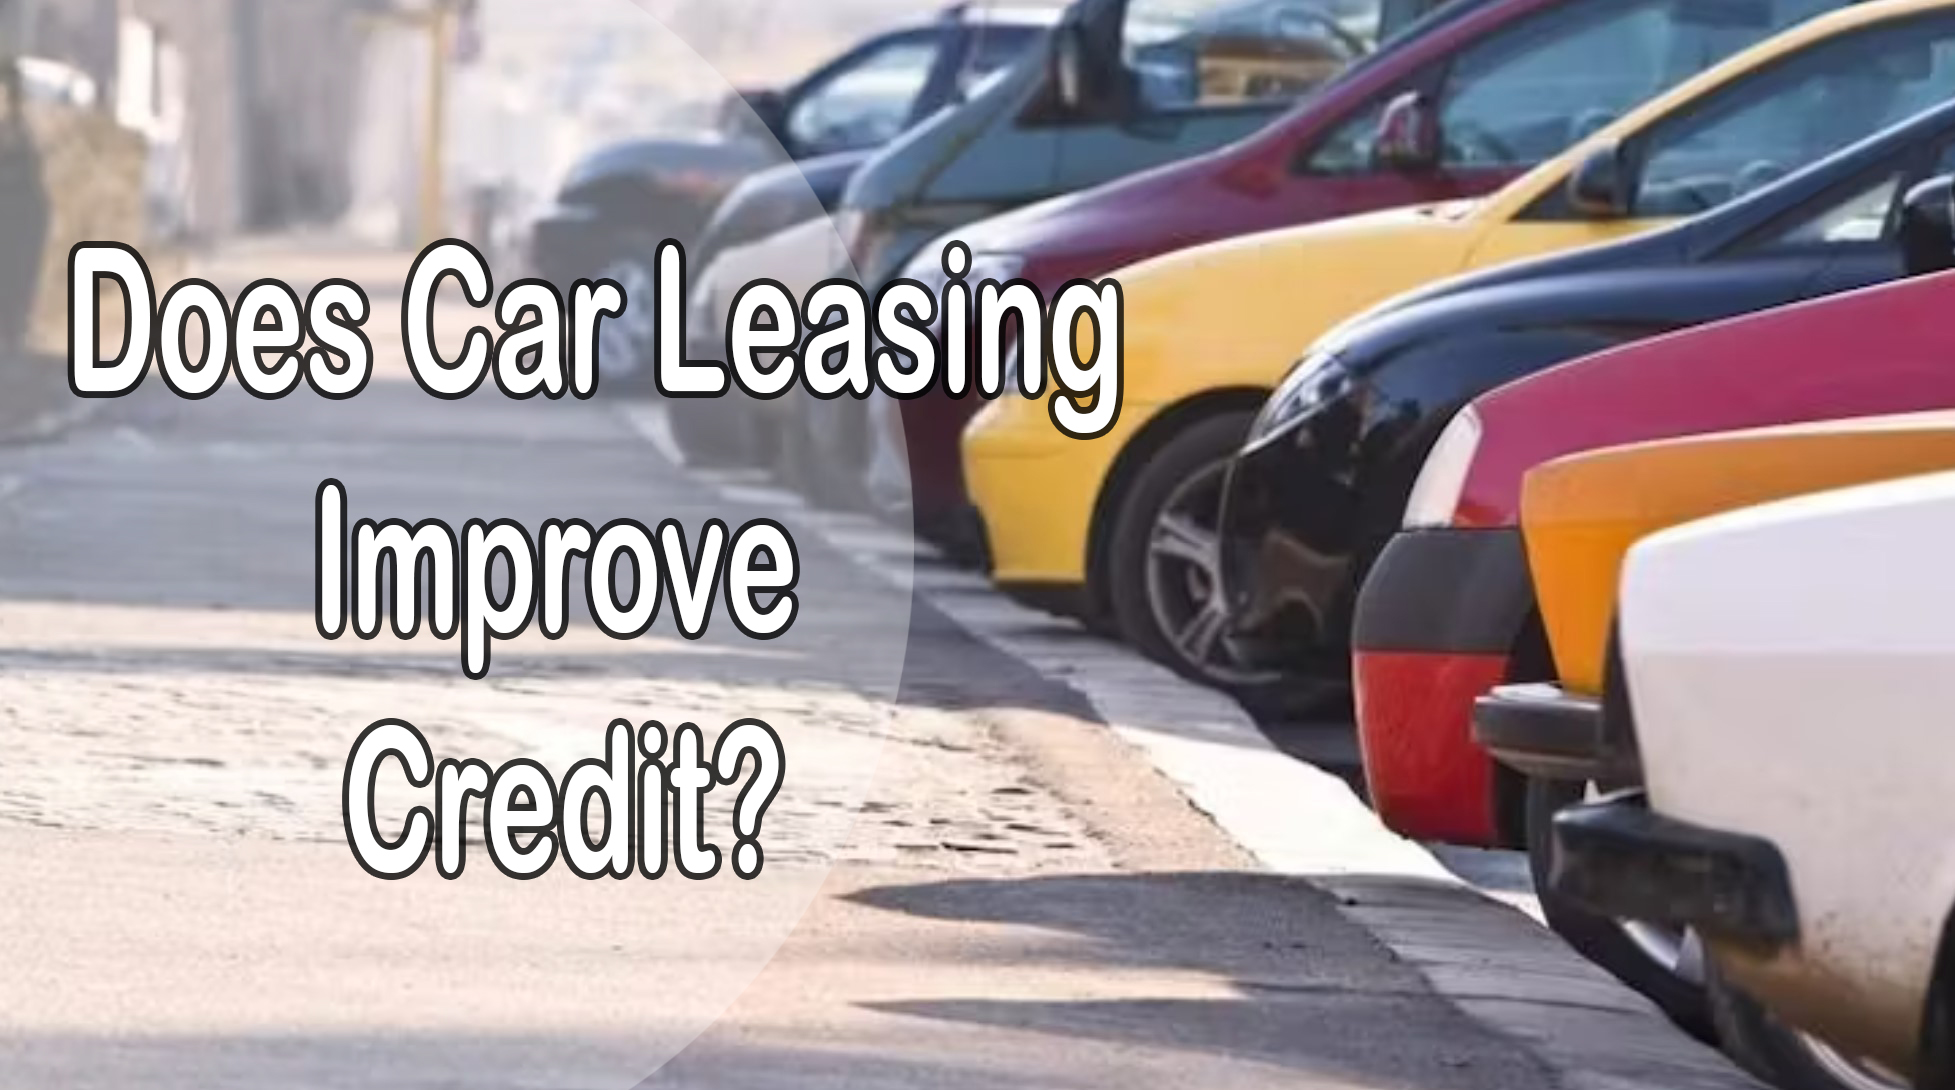 Does Car Leasing Improve Credit?